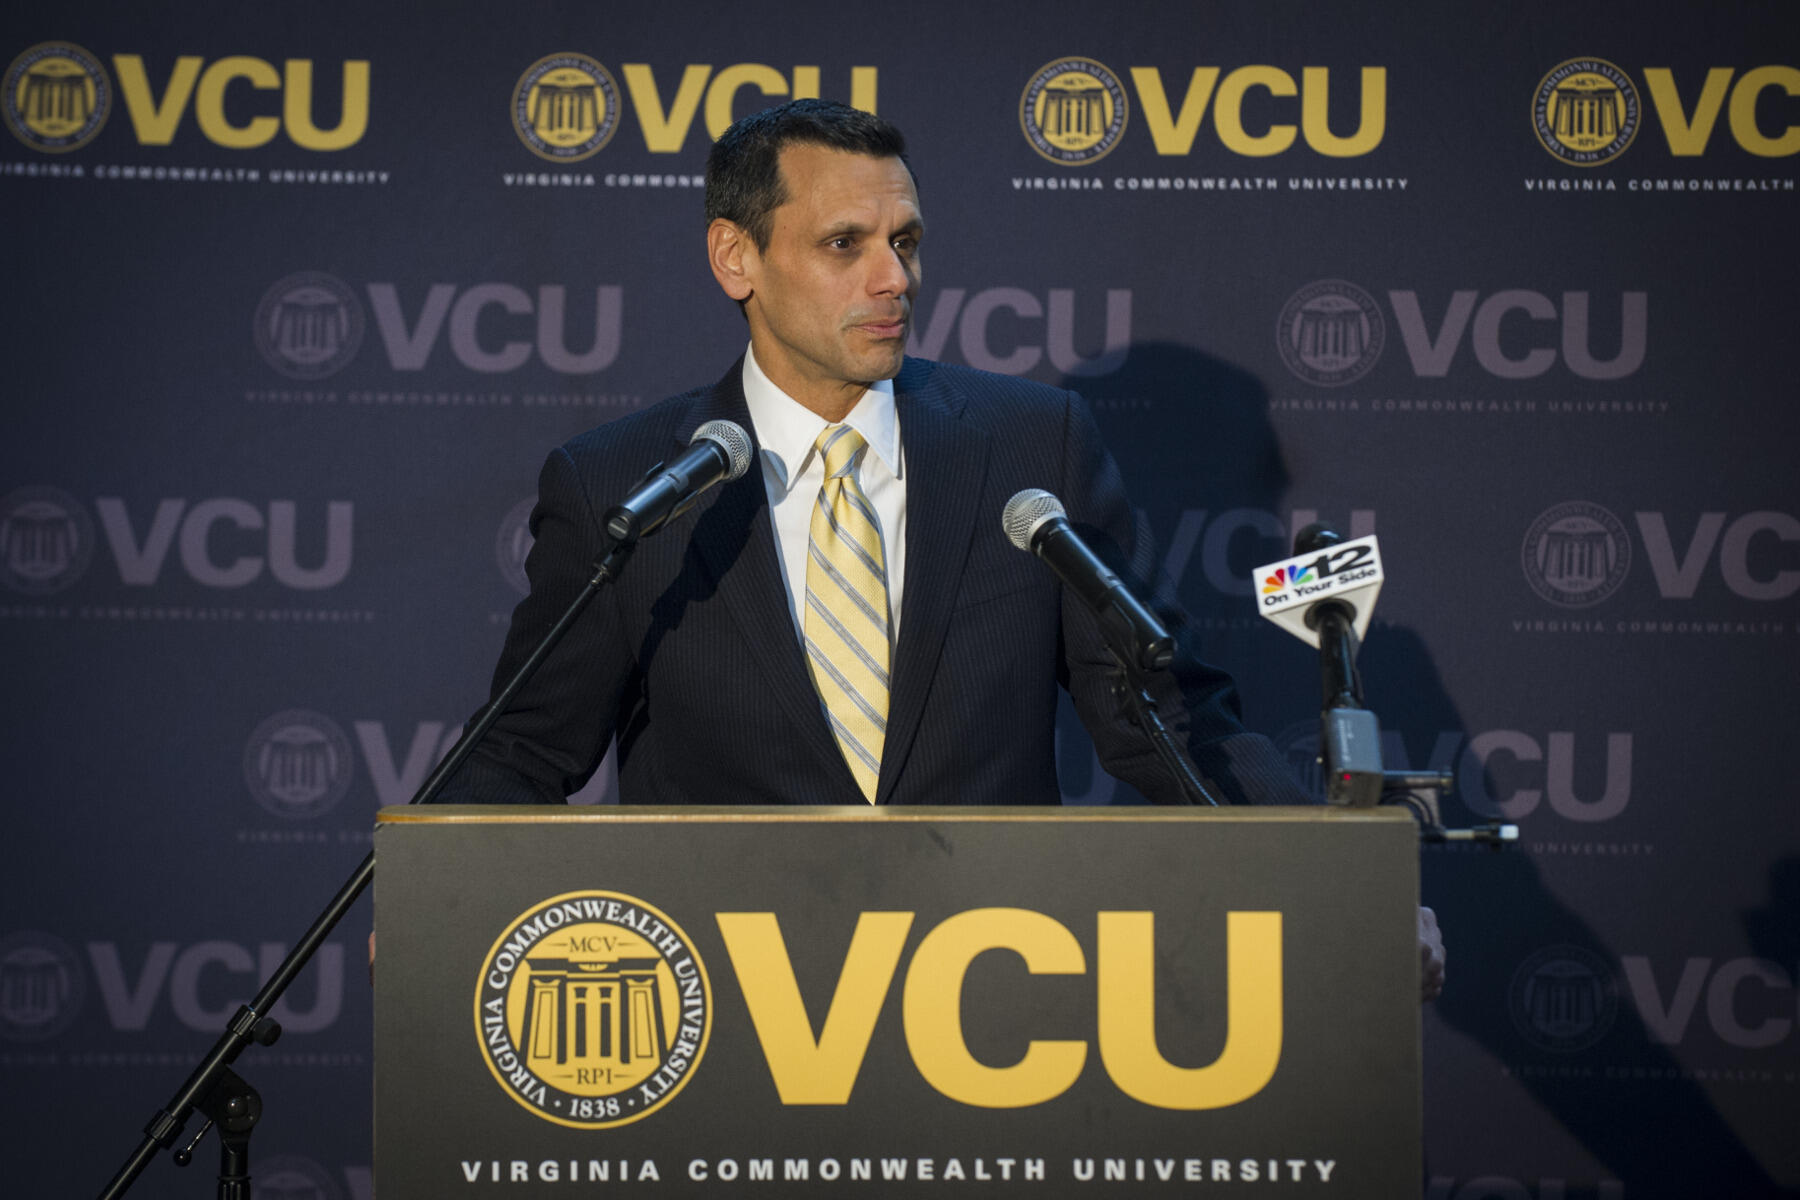 VCU President Michael Rao, Ph.D., speaks during the announcement of the “VCU’s Impact on the Region: Talent, Innovation, Collaboration” report Tuesday, Jan. 11 at the Virginia BioTechnology Research Park.
<br>Photo by Julia Rendleman, University Marketing.